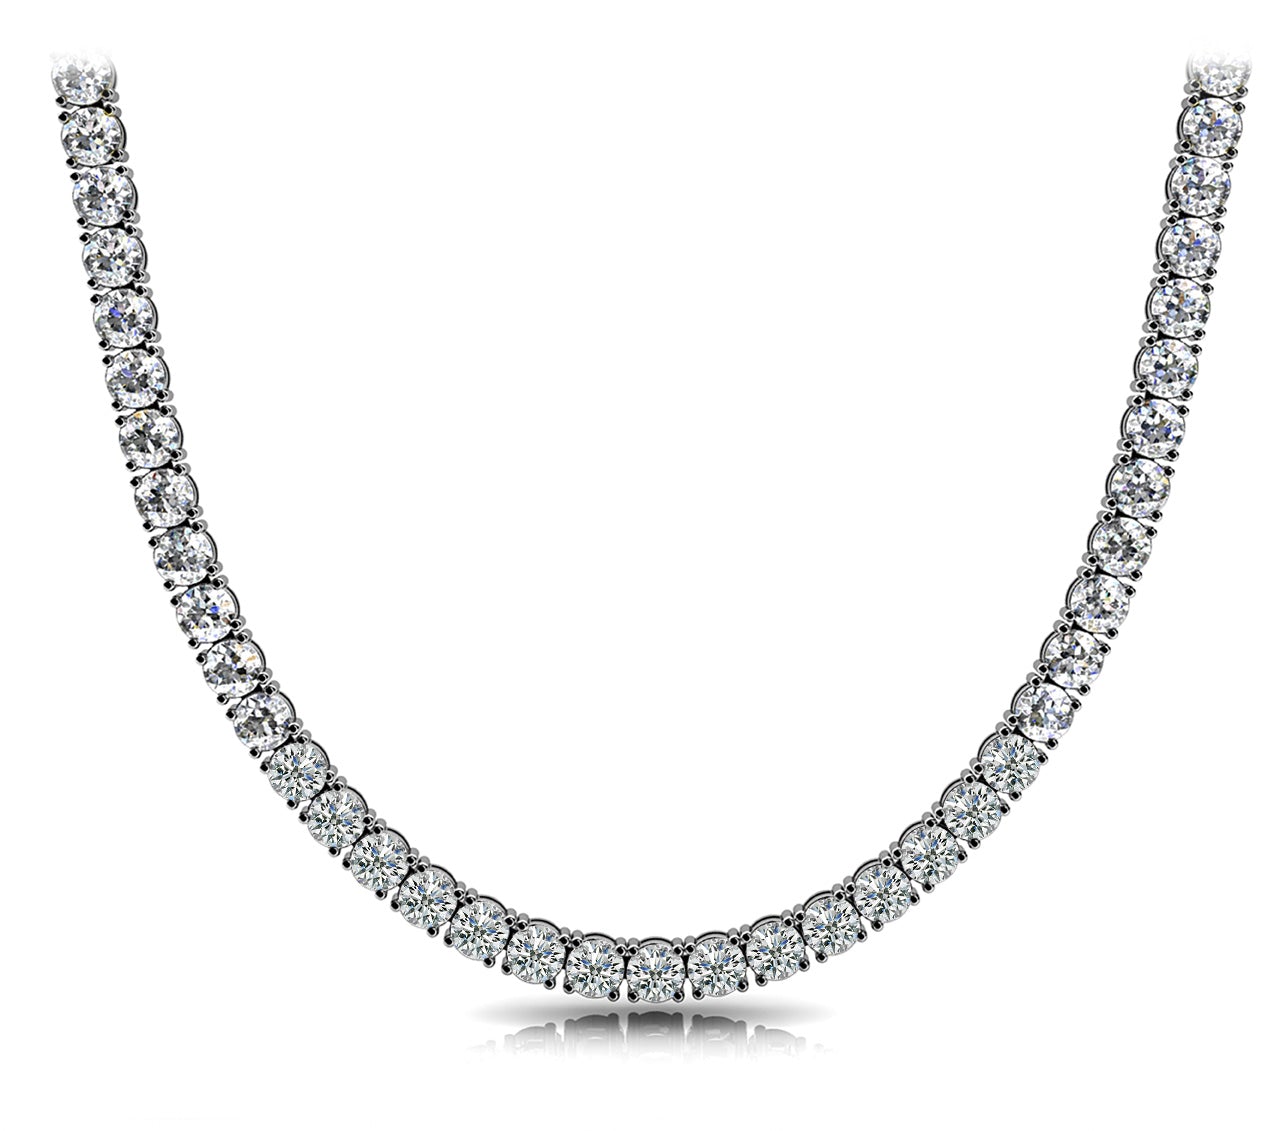 Diamond Tennis Necklace Round Shaped 40 Carat 4 prong set in 18K White Gold Front View